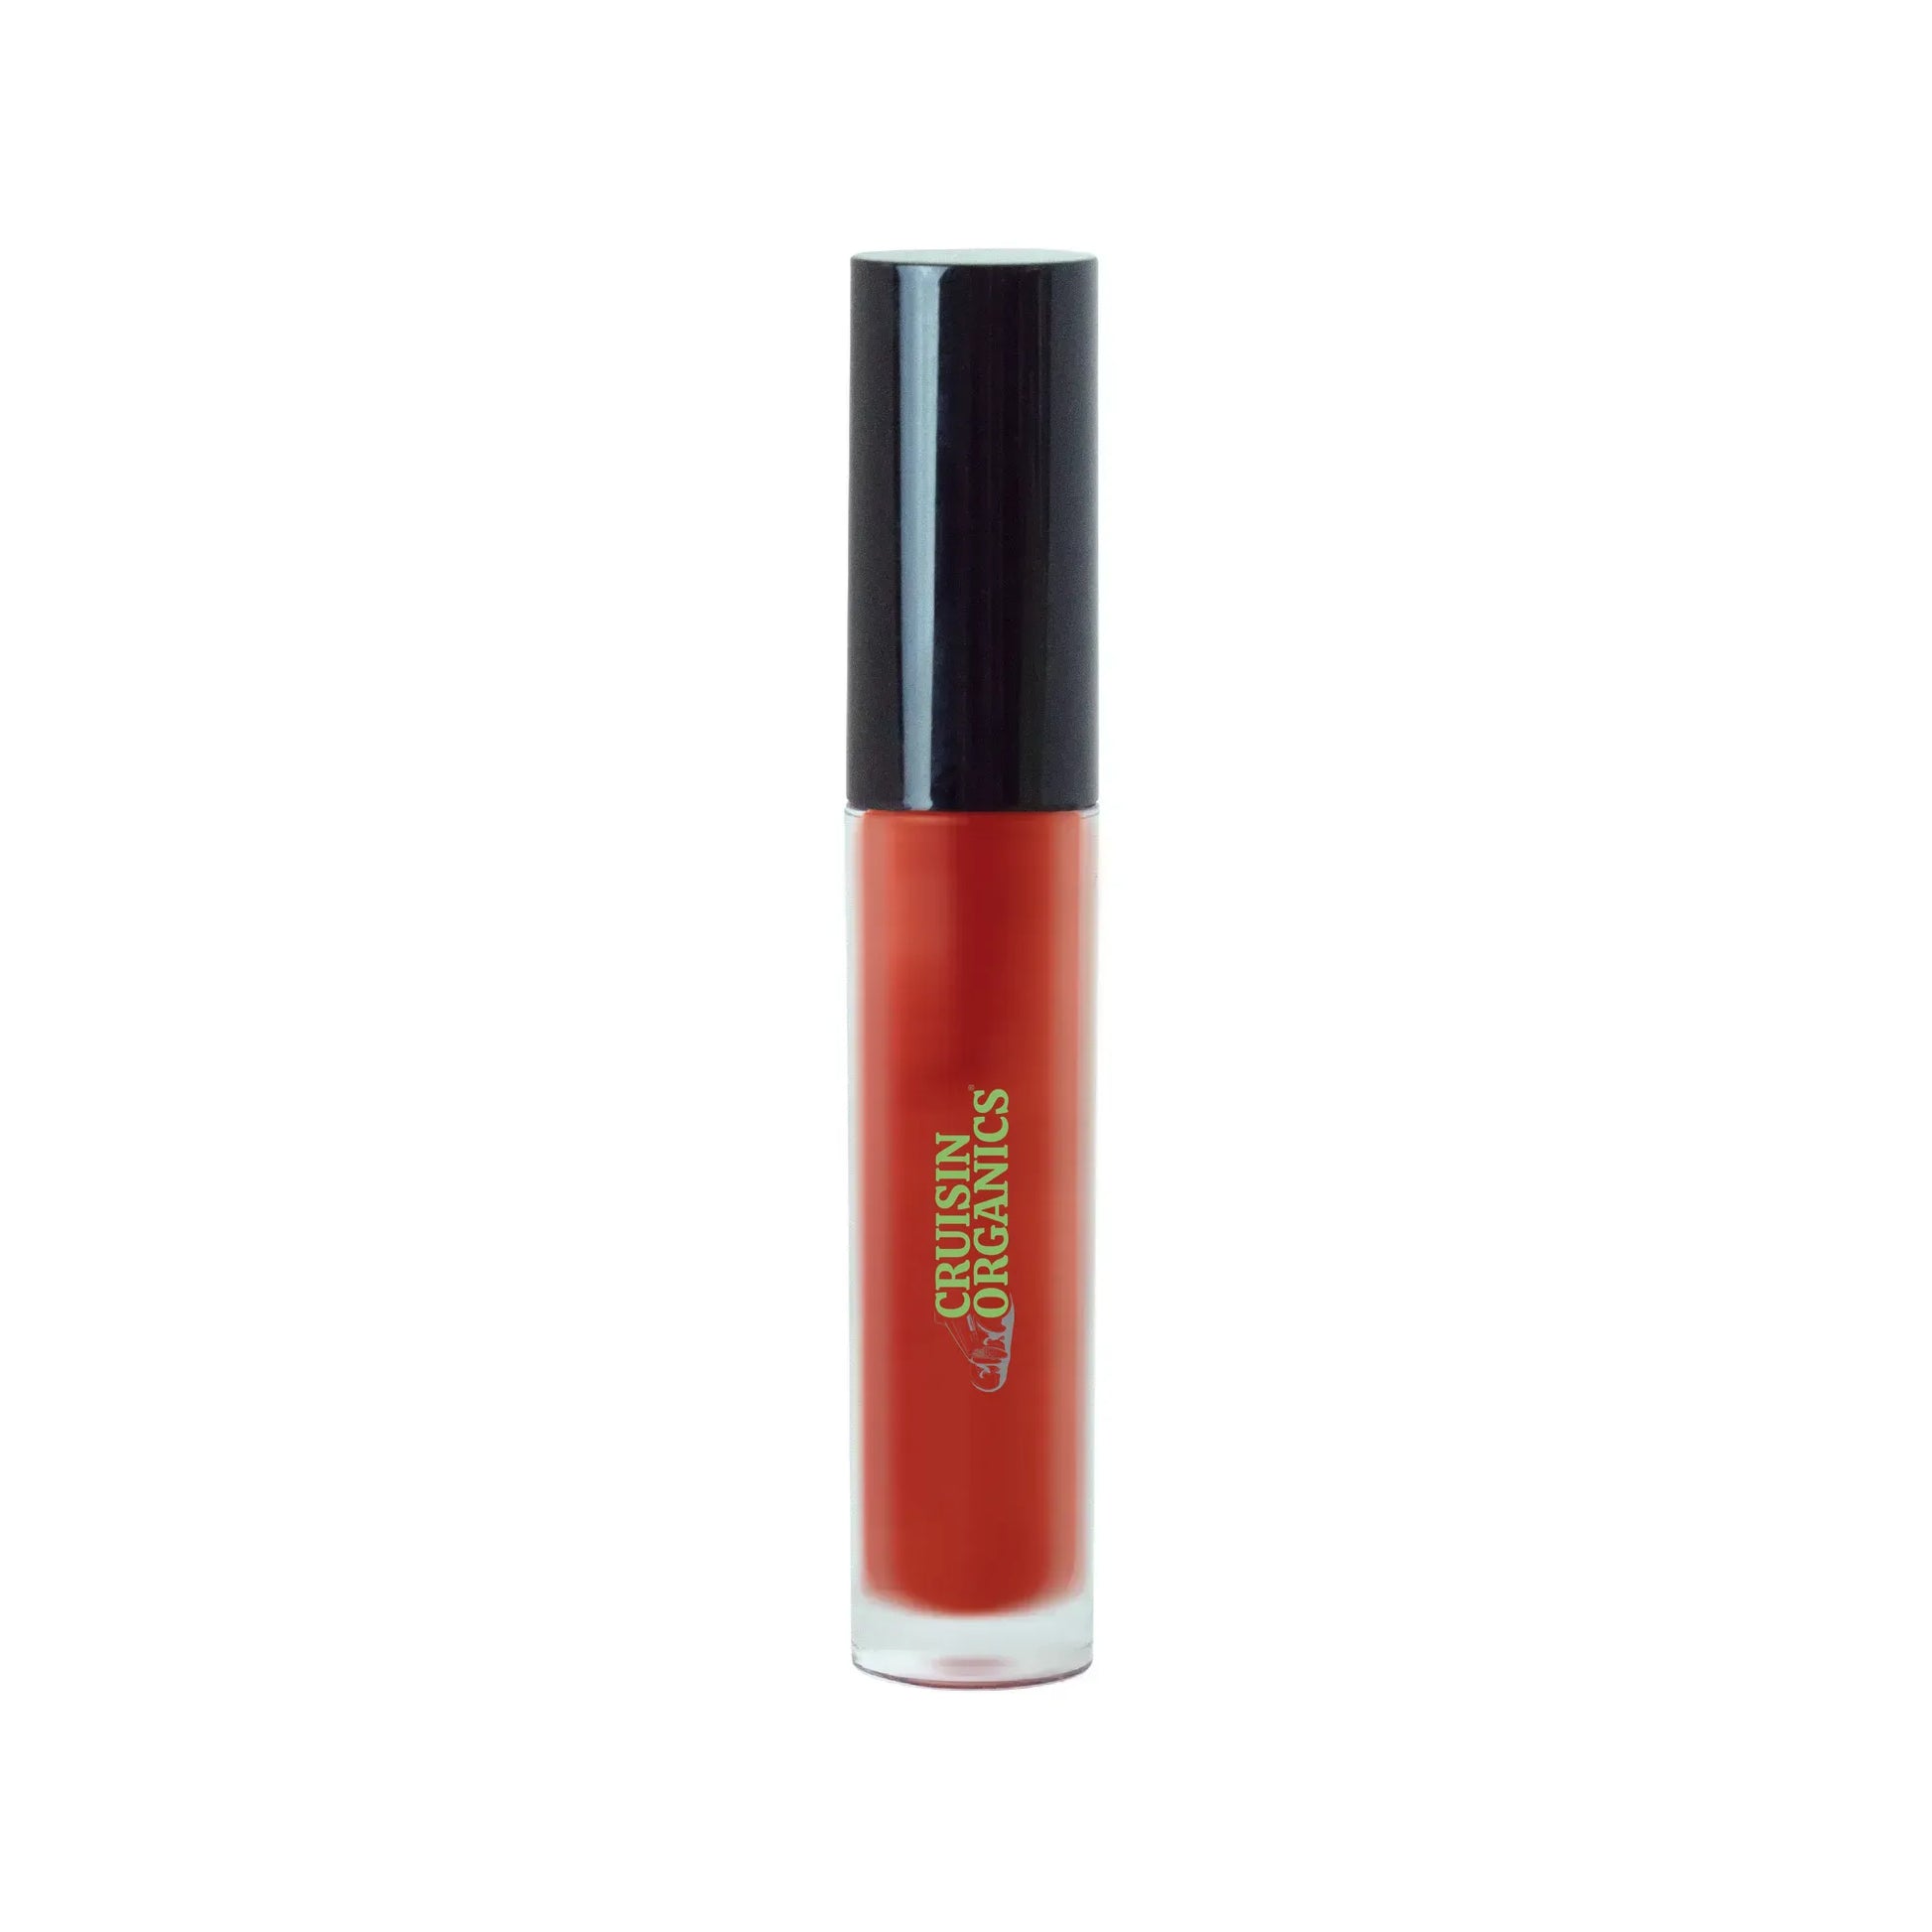 Elevate your style with Cruisii Organics Crimson Lip Gloss. Choose between shimmer or natural finish options for a sophisticated look. This sheer tint adds the perfect amount of shine and pigments to enhance your look throughout the day or night. With a supportive tone, add this liquid lip gloss to your collection for effortless, everyday glam.